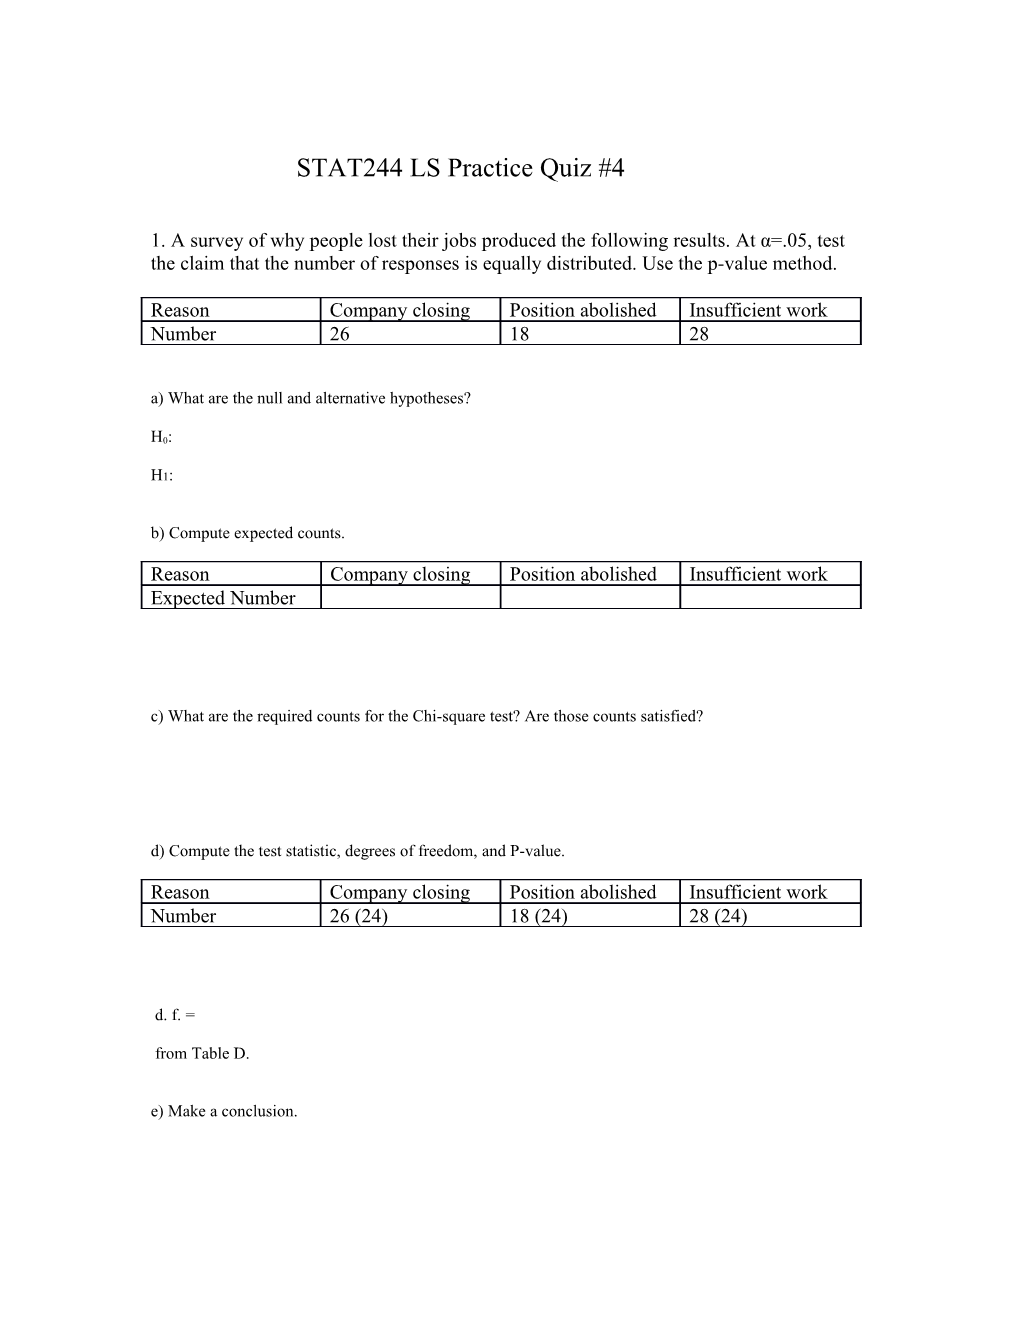 STAT244 Intro to Probability and Statistics